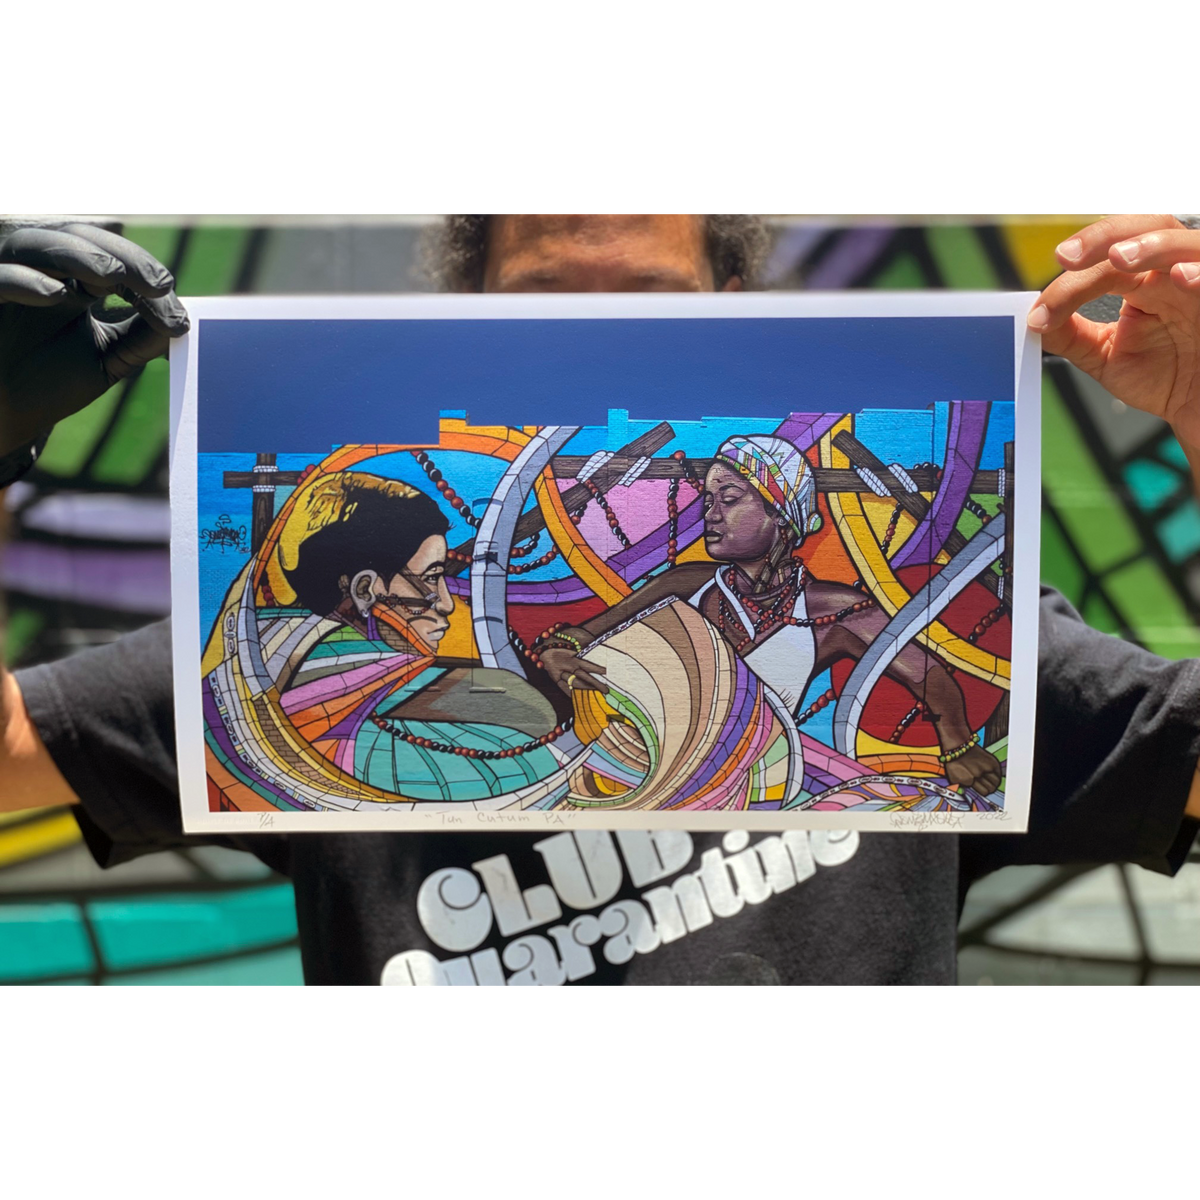 Don Rimx &quot;Tun Cutum PÁ&quot; - Archival Print, Limited Edition of 25 - 11 x 17&quot;